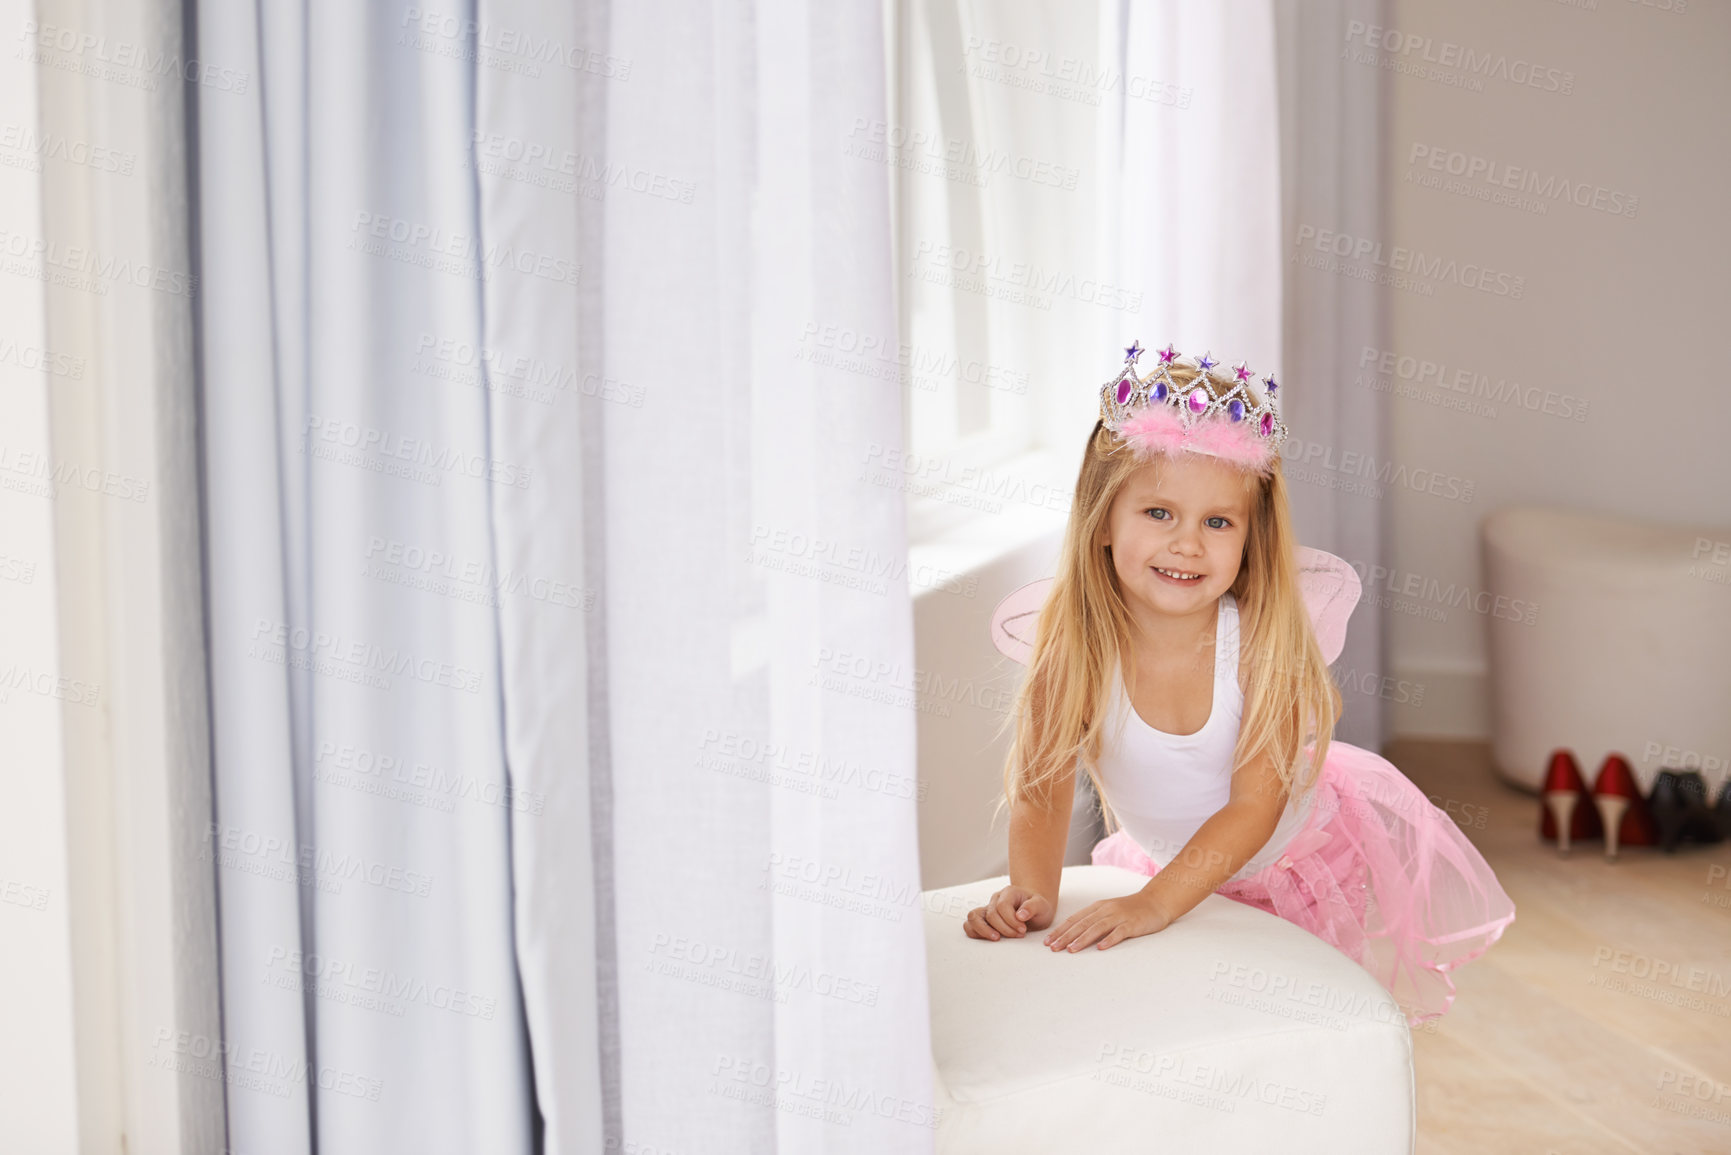 Buy stock photo Princess, costume and portrait of girl in home for fun, playing and pretend for happy kids game. Fantasy, fashion and child in creative fairy fancy dress with wings, tiara and smile in bedroom.